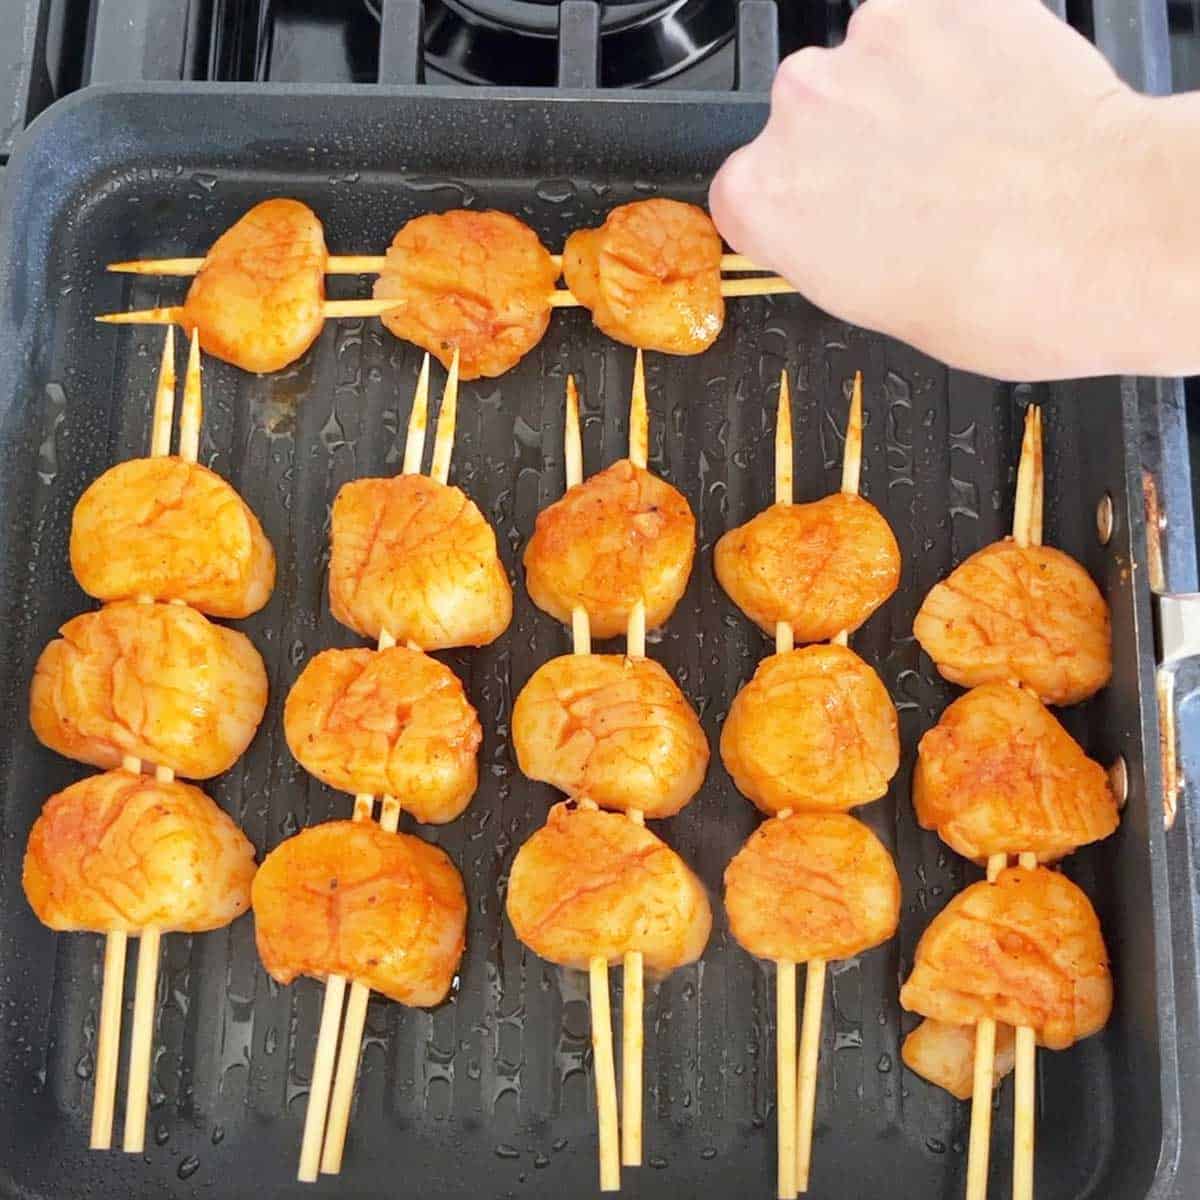 Grilling the scallops. 